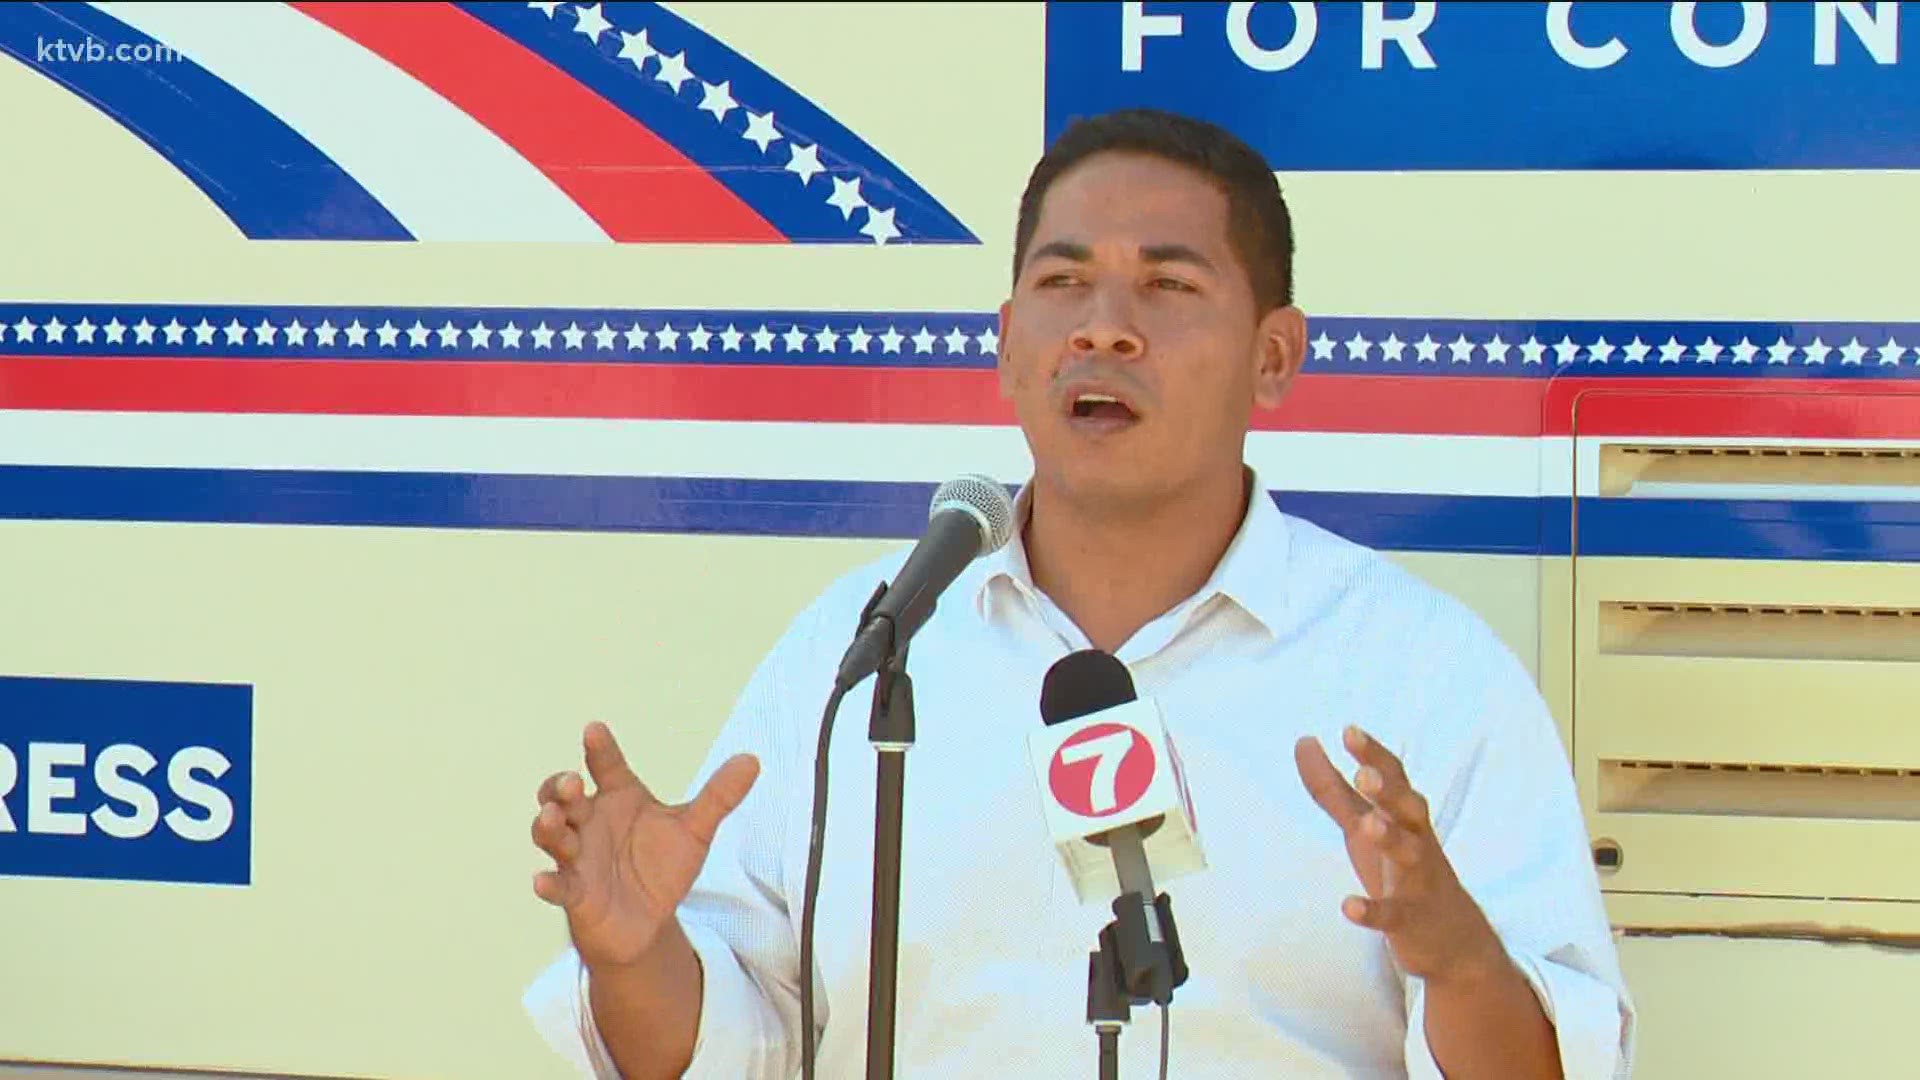 Rudy Soto, who is running against Russ Fulcher, began his tour in Garden City on Labor Day.